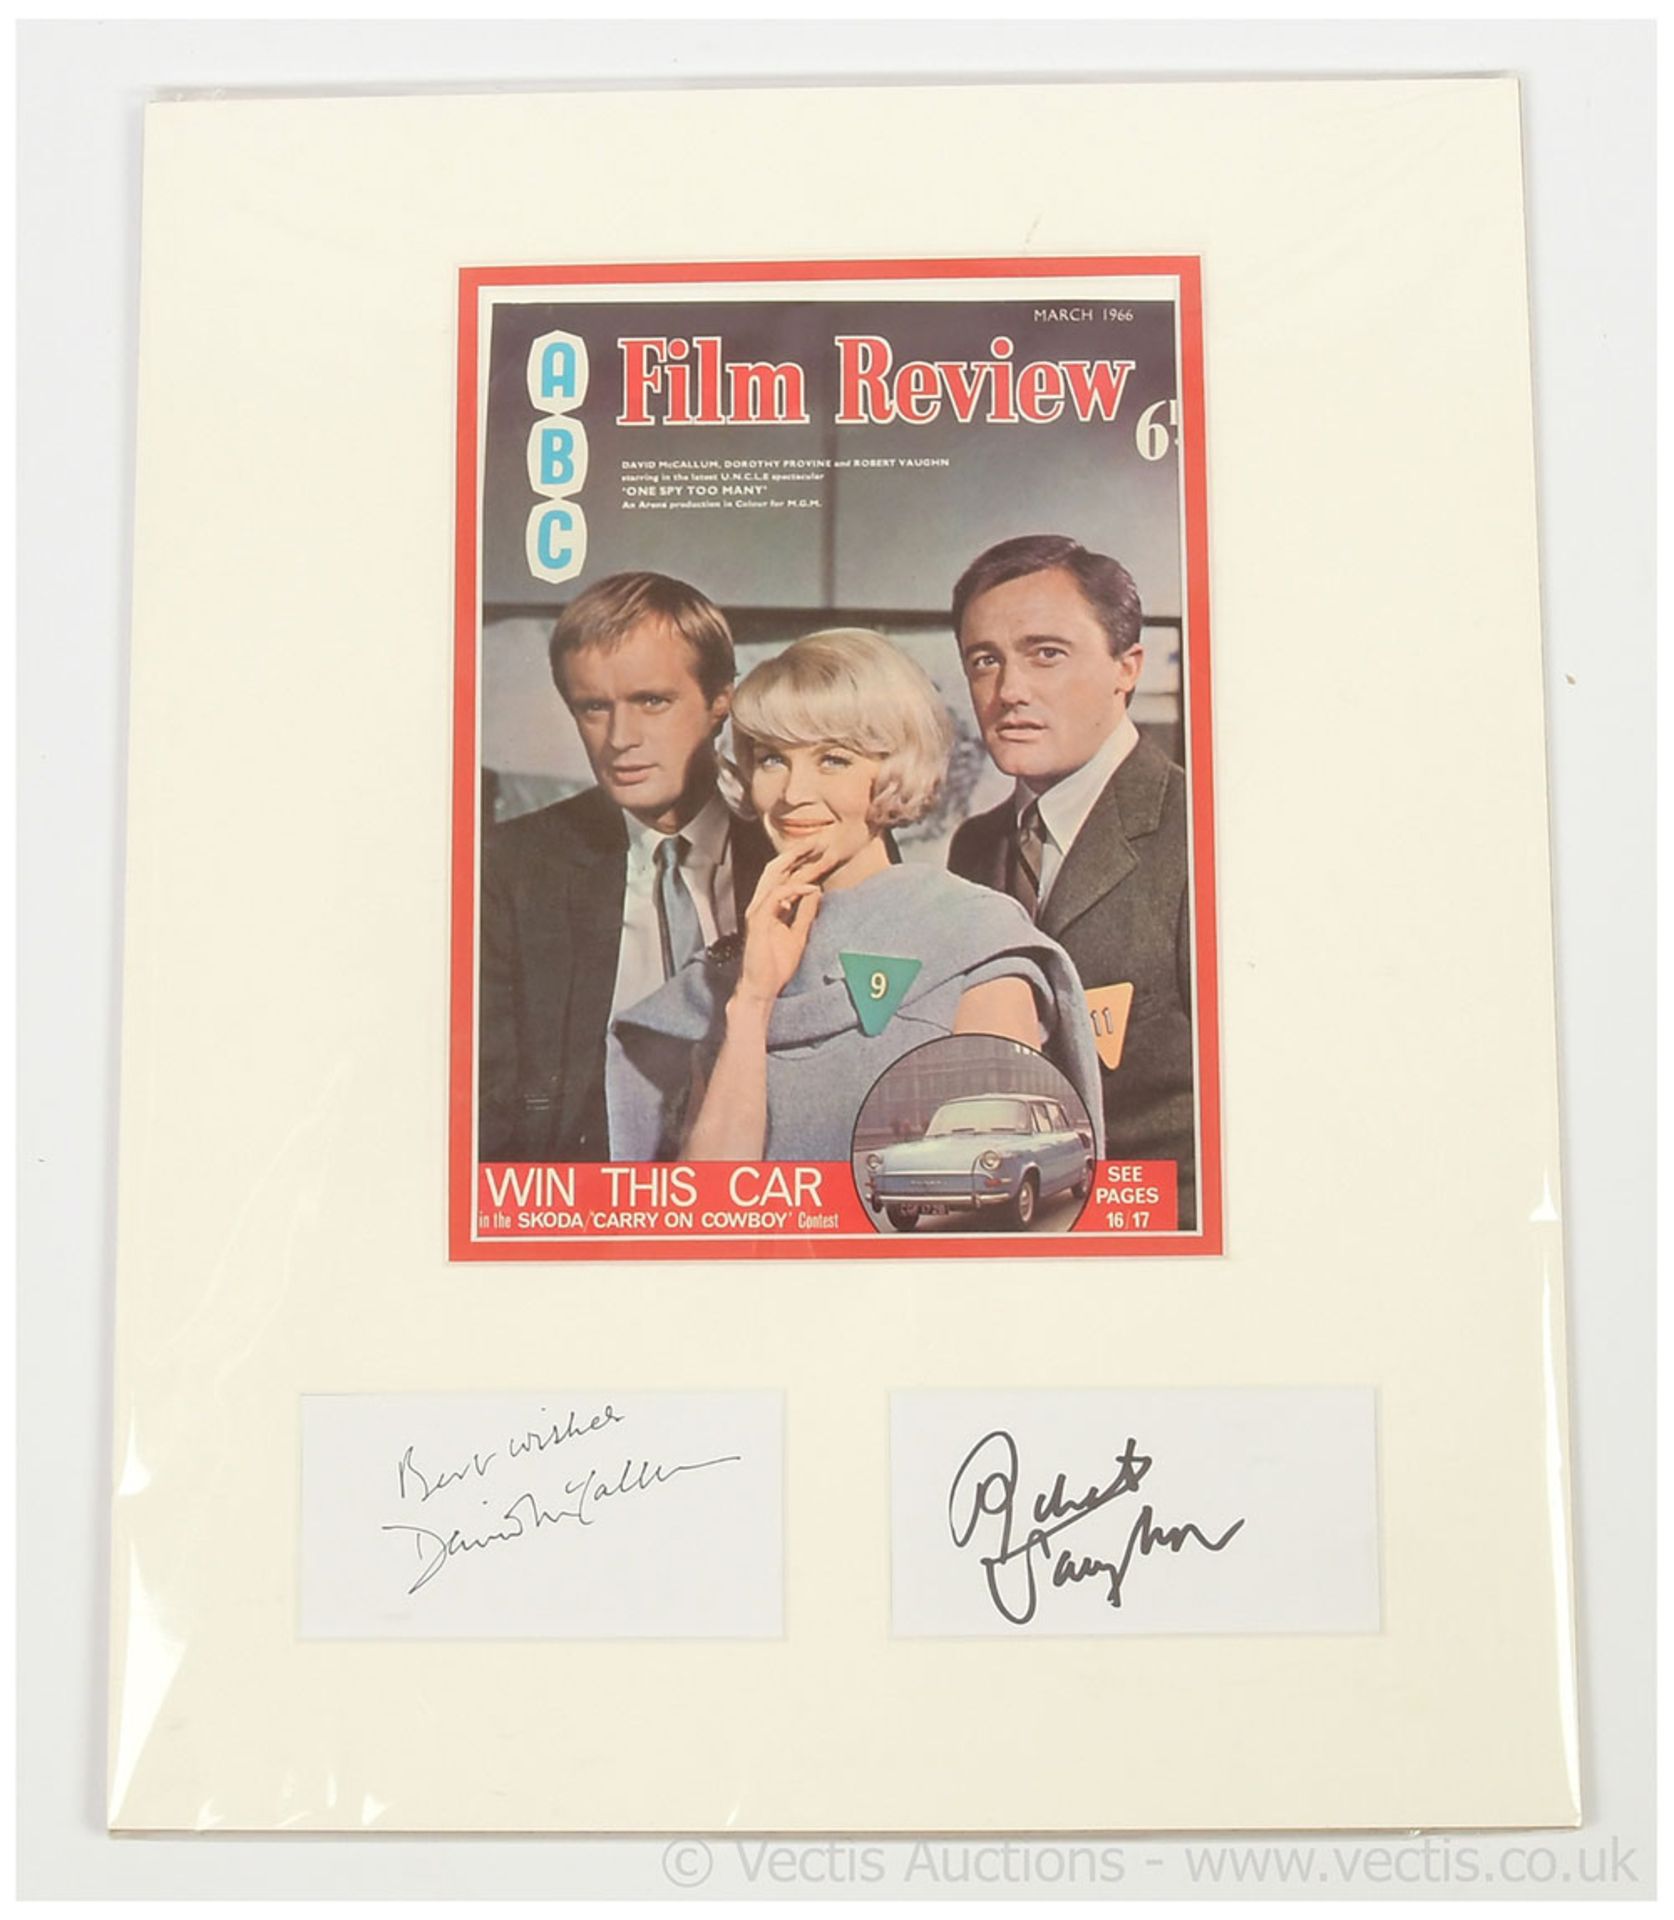 The Man From U.N.C.L.E. autographed display,